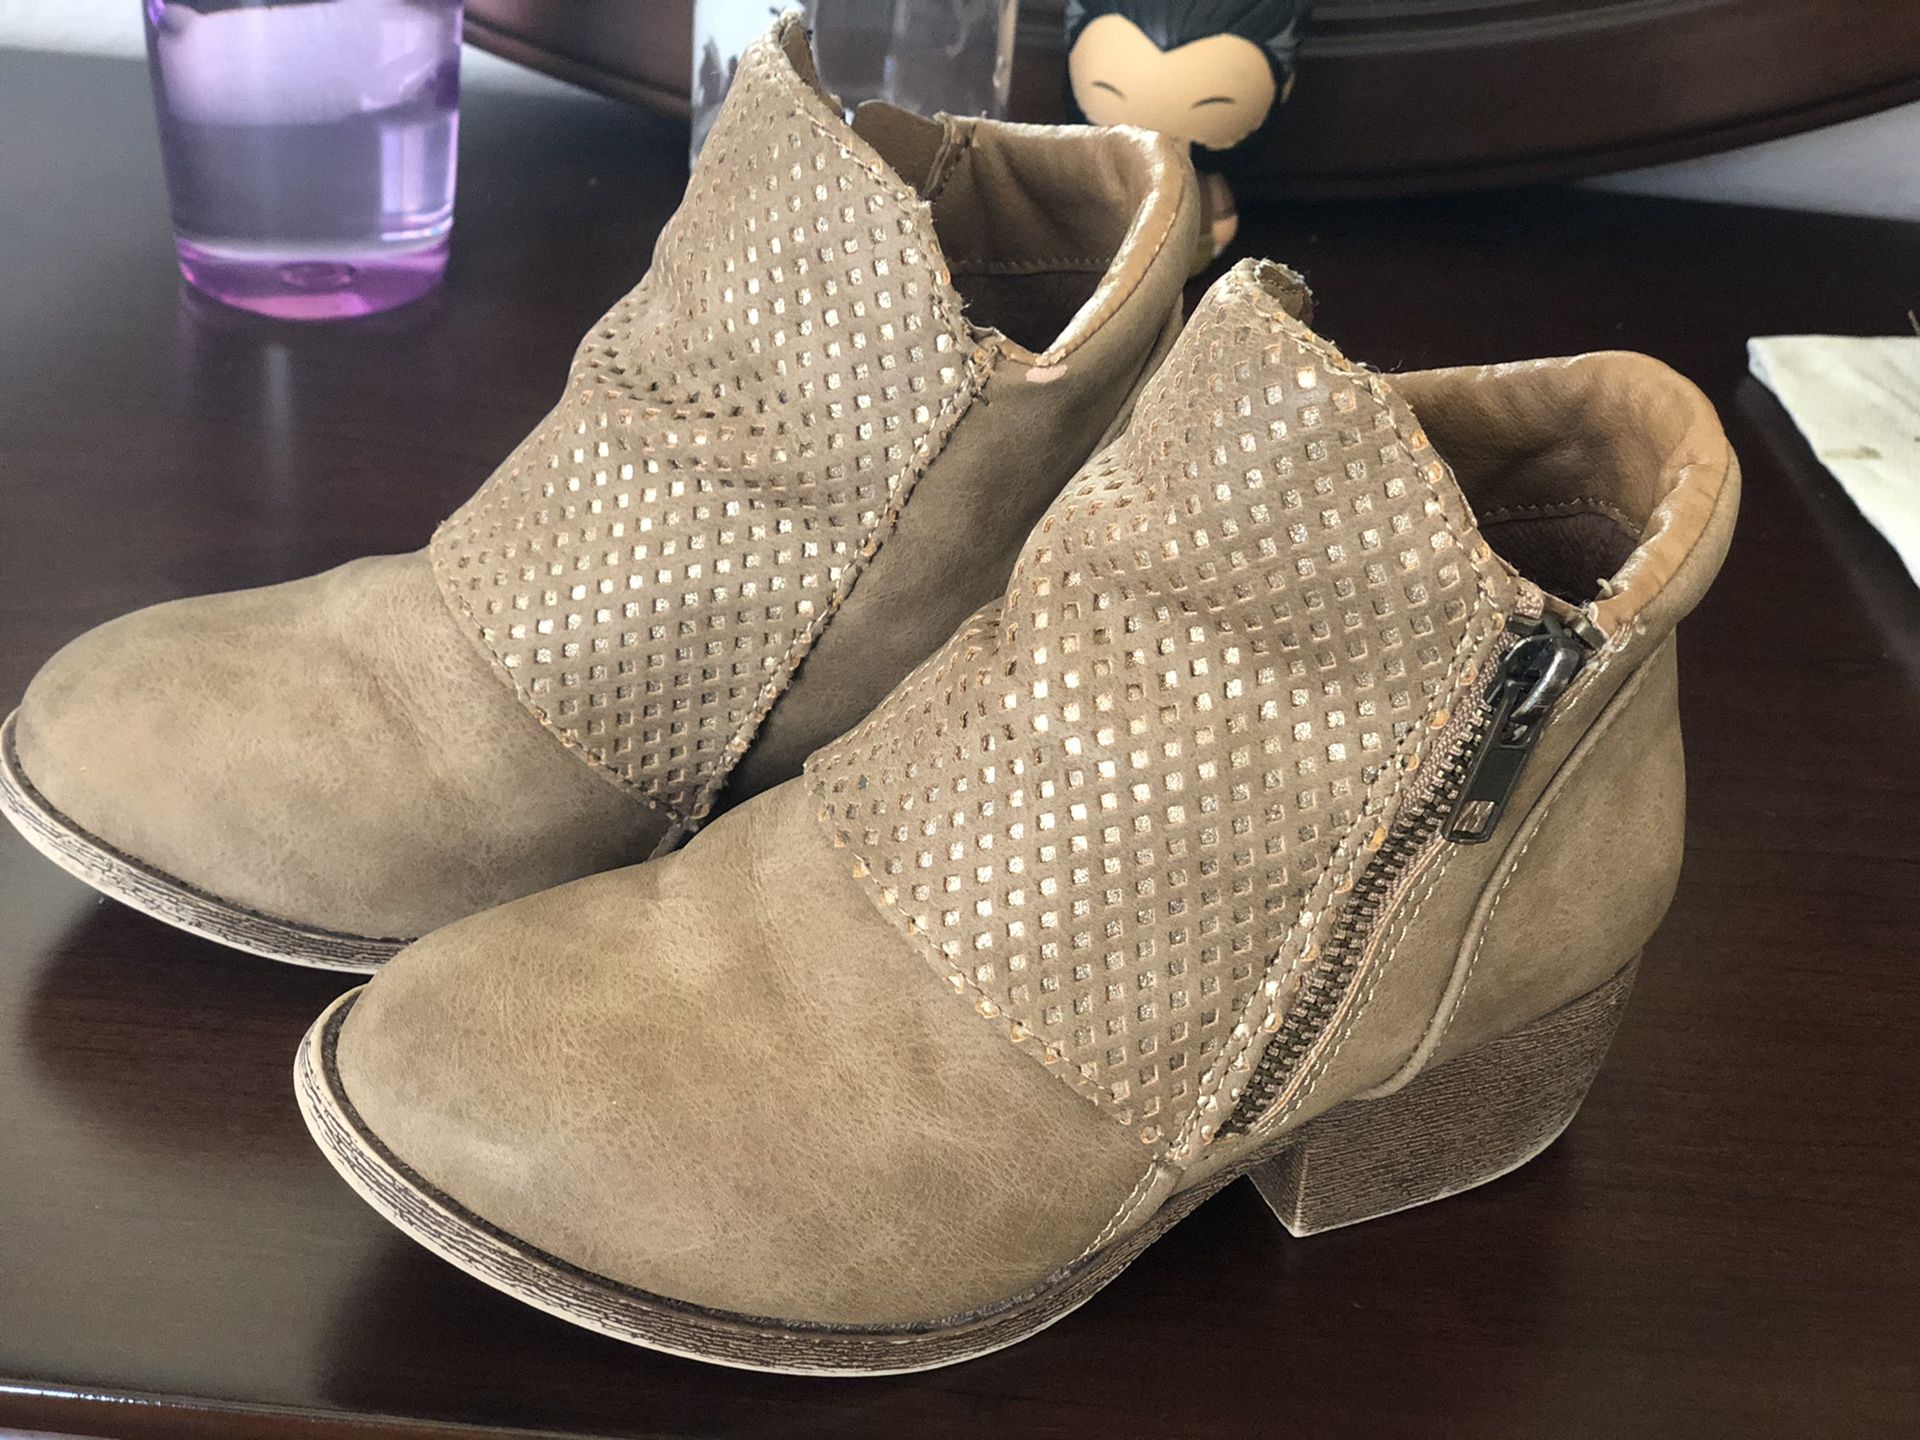 Girls dress casual boots. Size 13 LIKE NEW